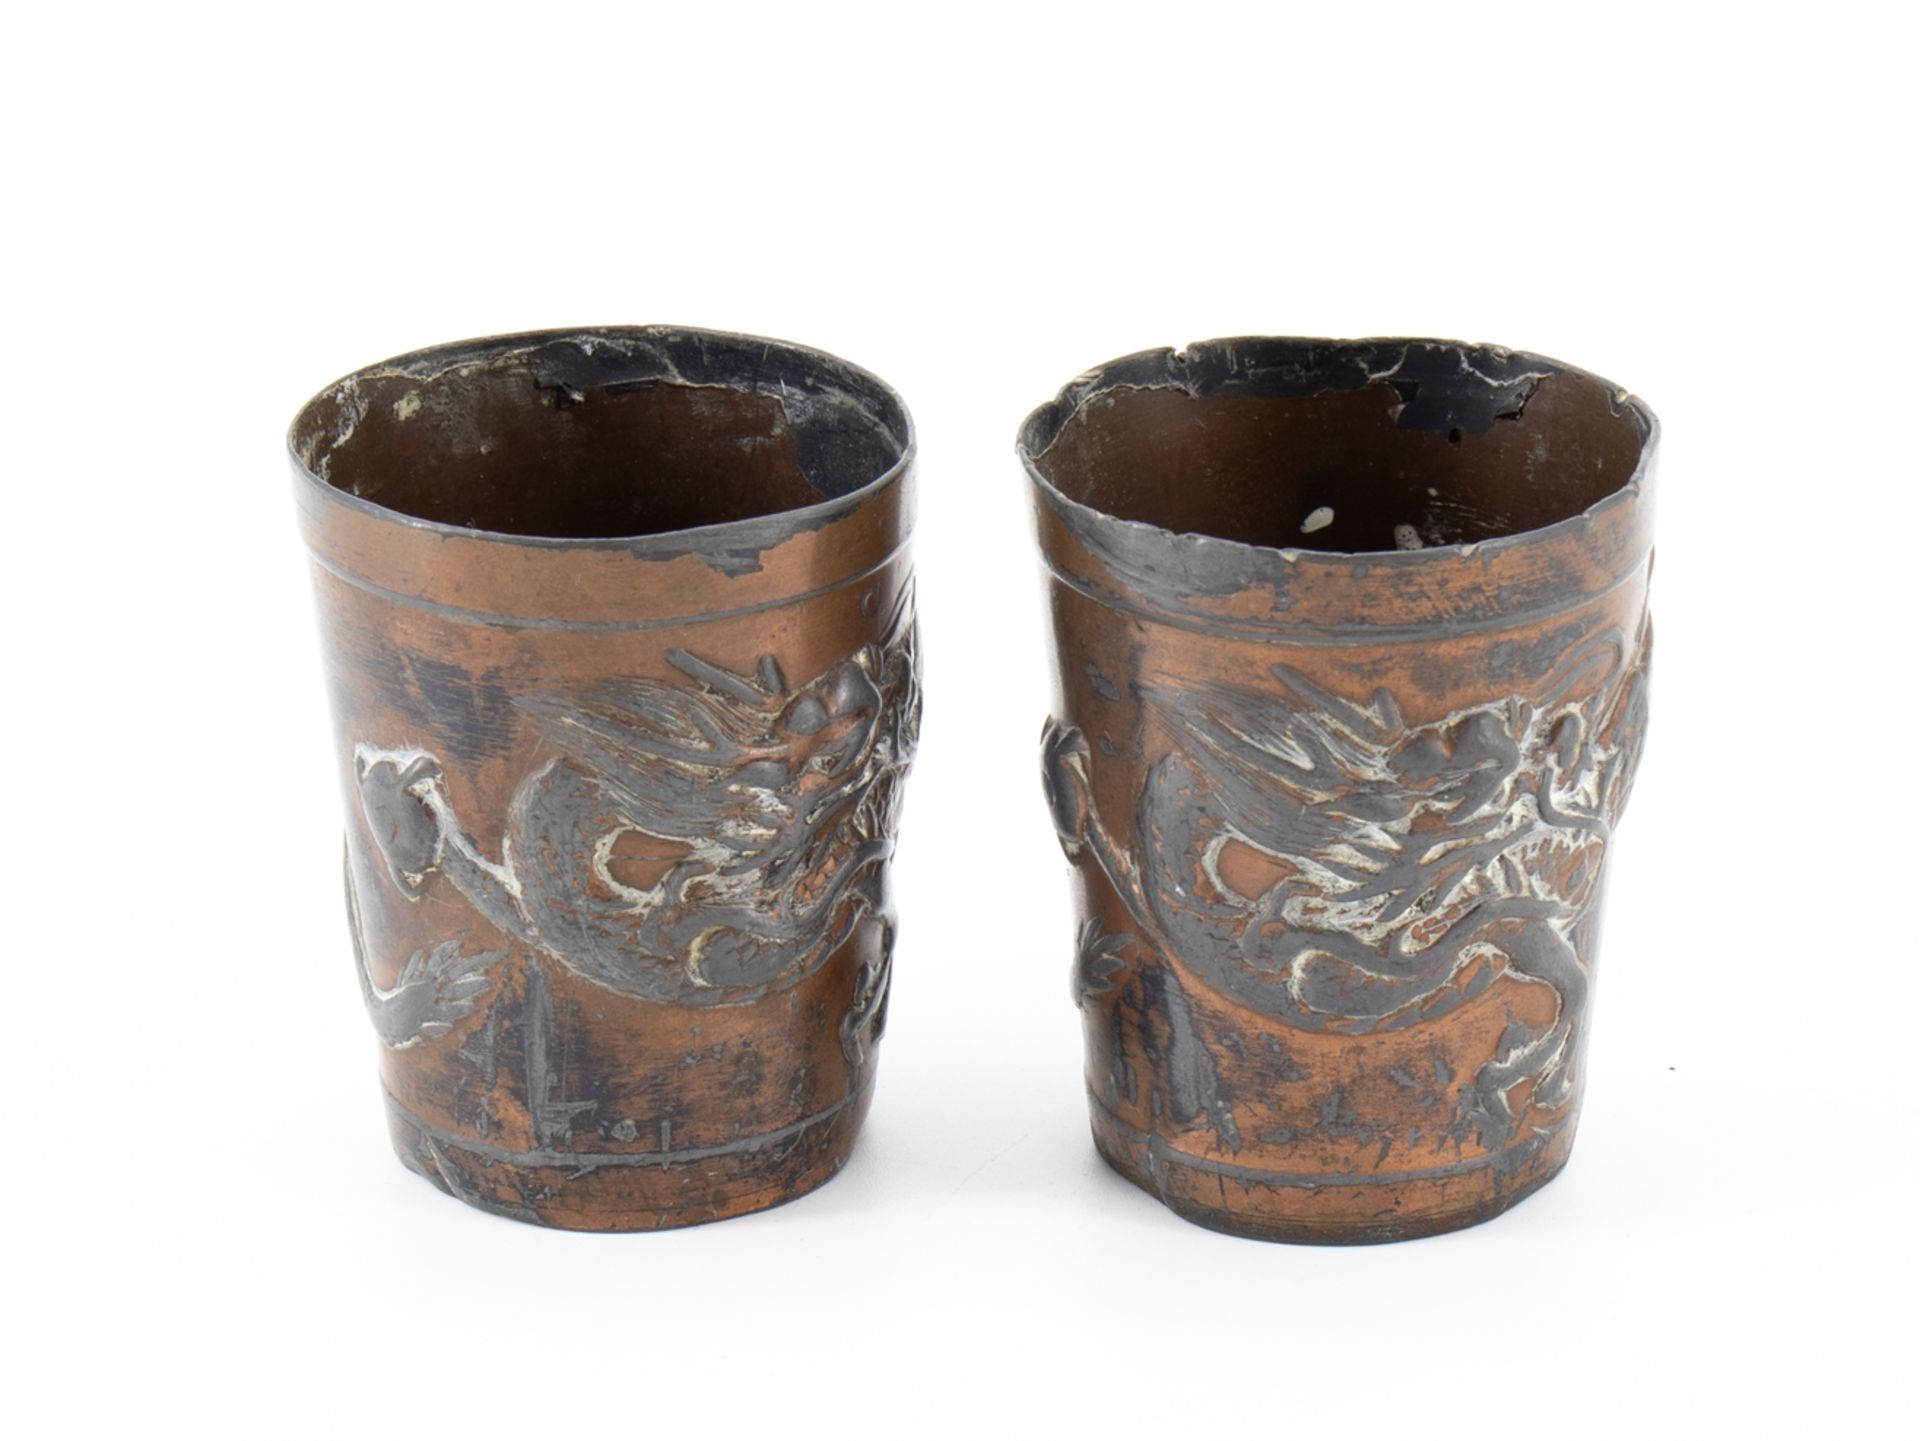 4 cups with dragon motif, China, around 1900 - Image 2 of 12